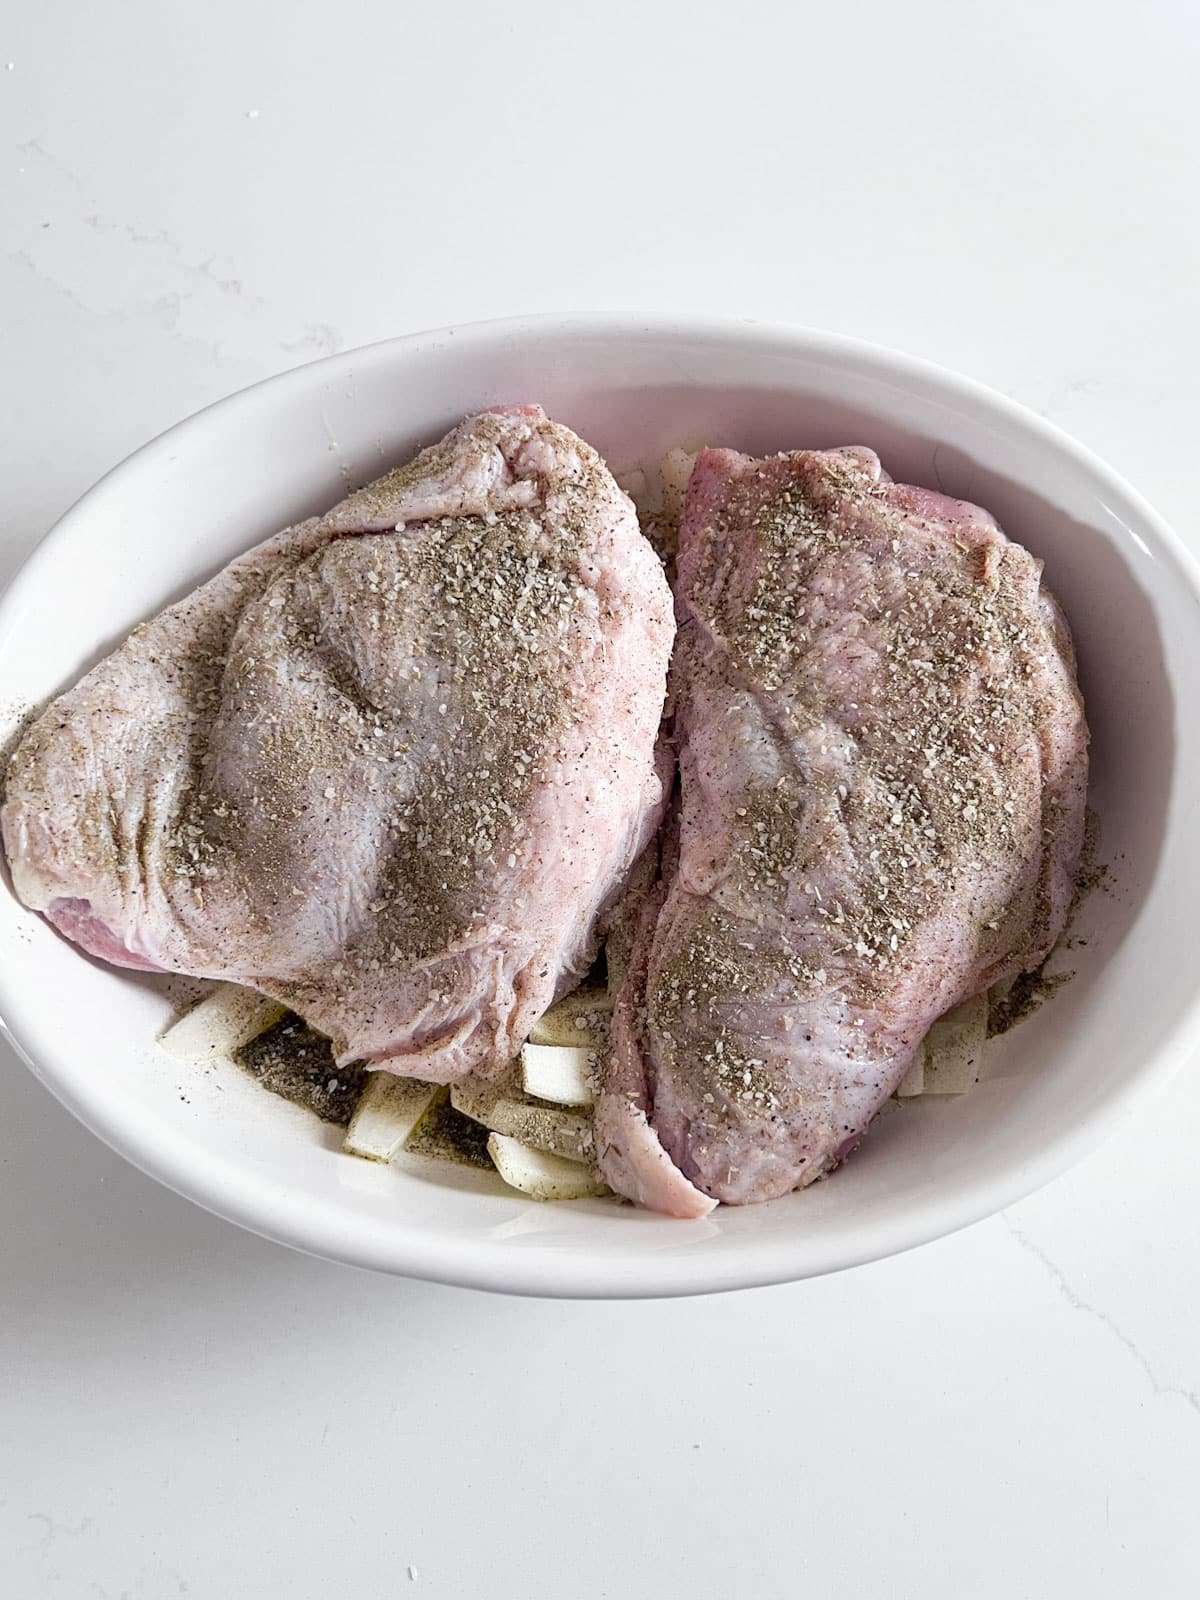 Raw turkey thighs with seasoning on them in the white oval baking pan.